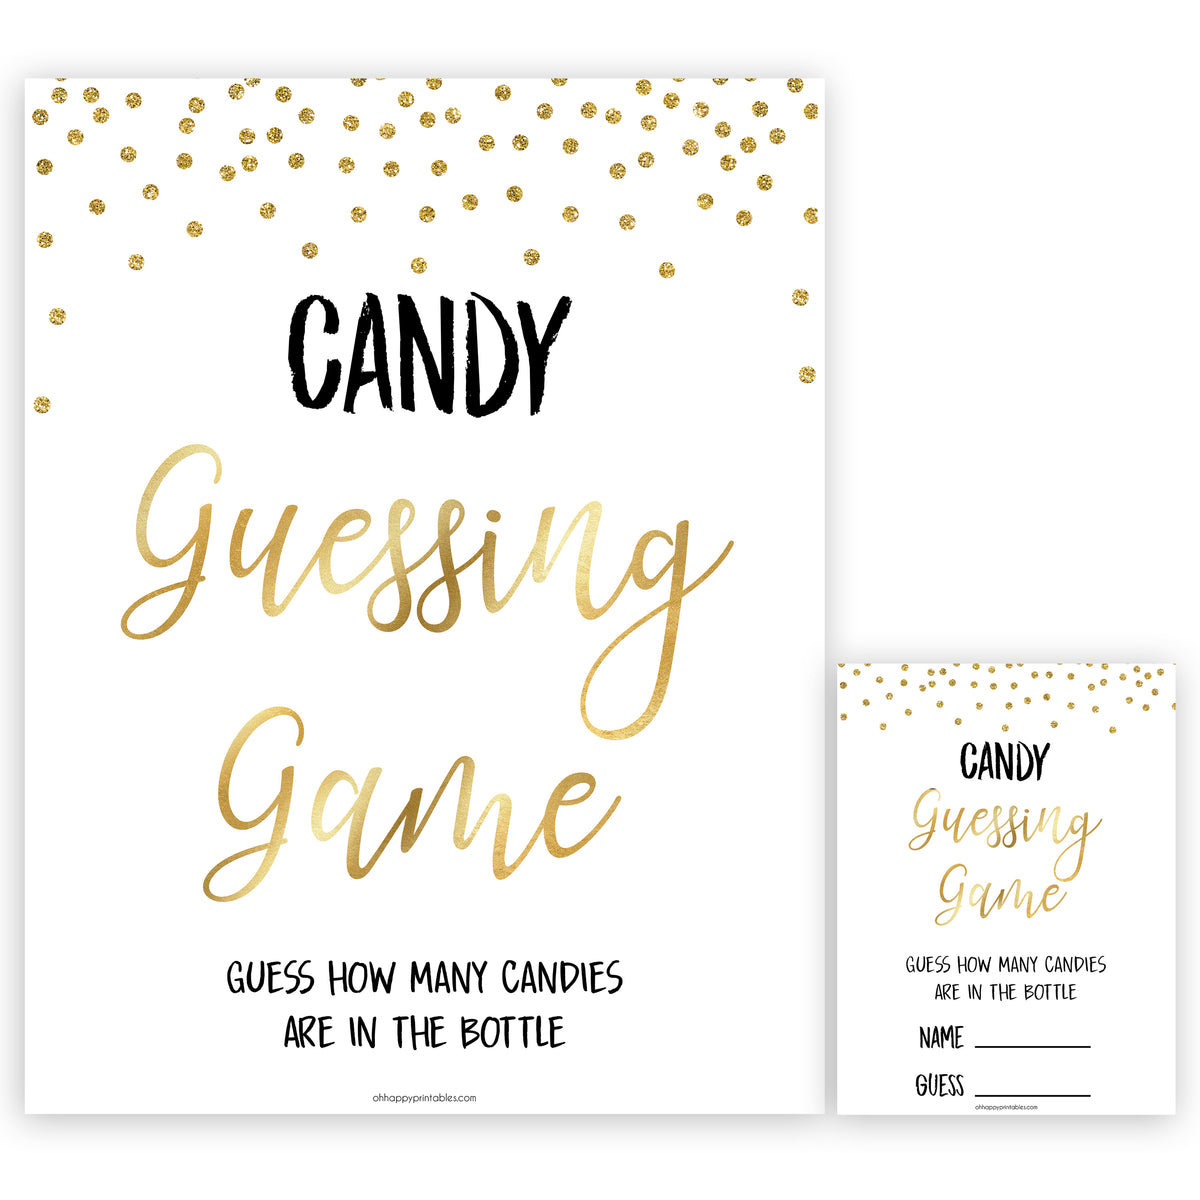 candy-guessing-game-gold-printable-baby-shower-games-ohhappyprintables